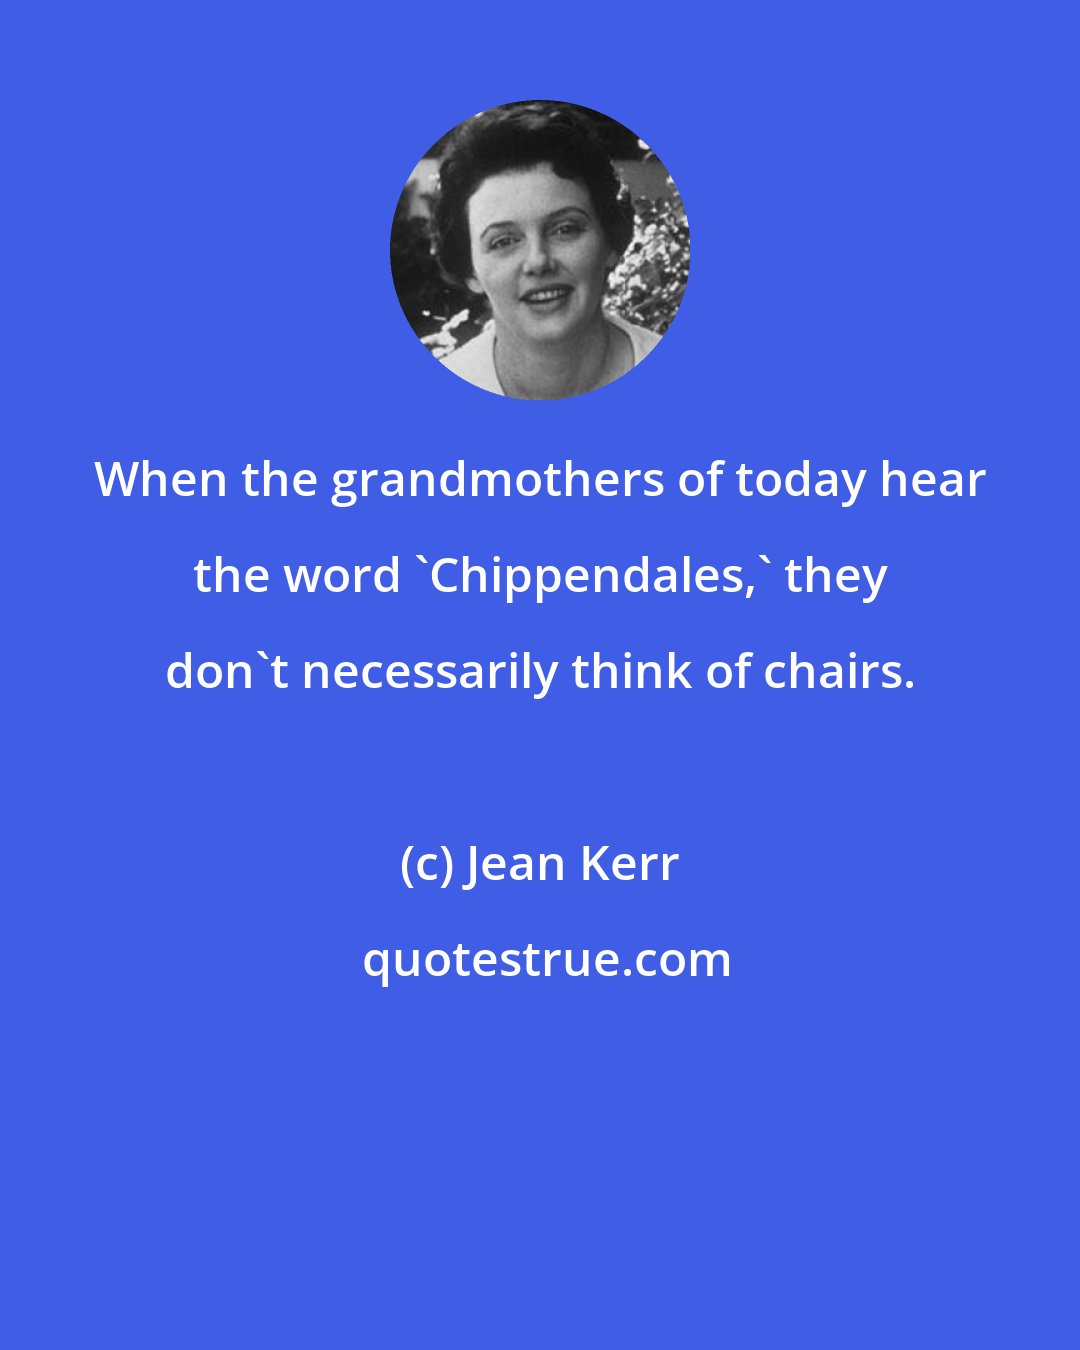 Jean Kerr: When the grandmothers of today hear the word 'Chippendales,' they don't necessarily think of chairs.